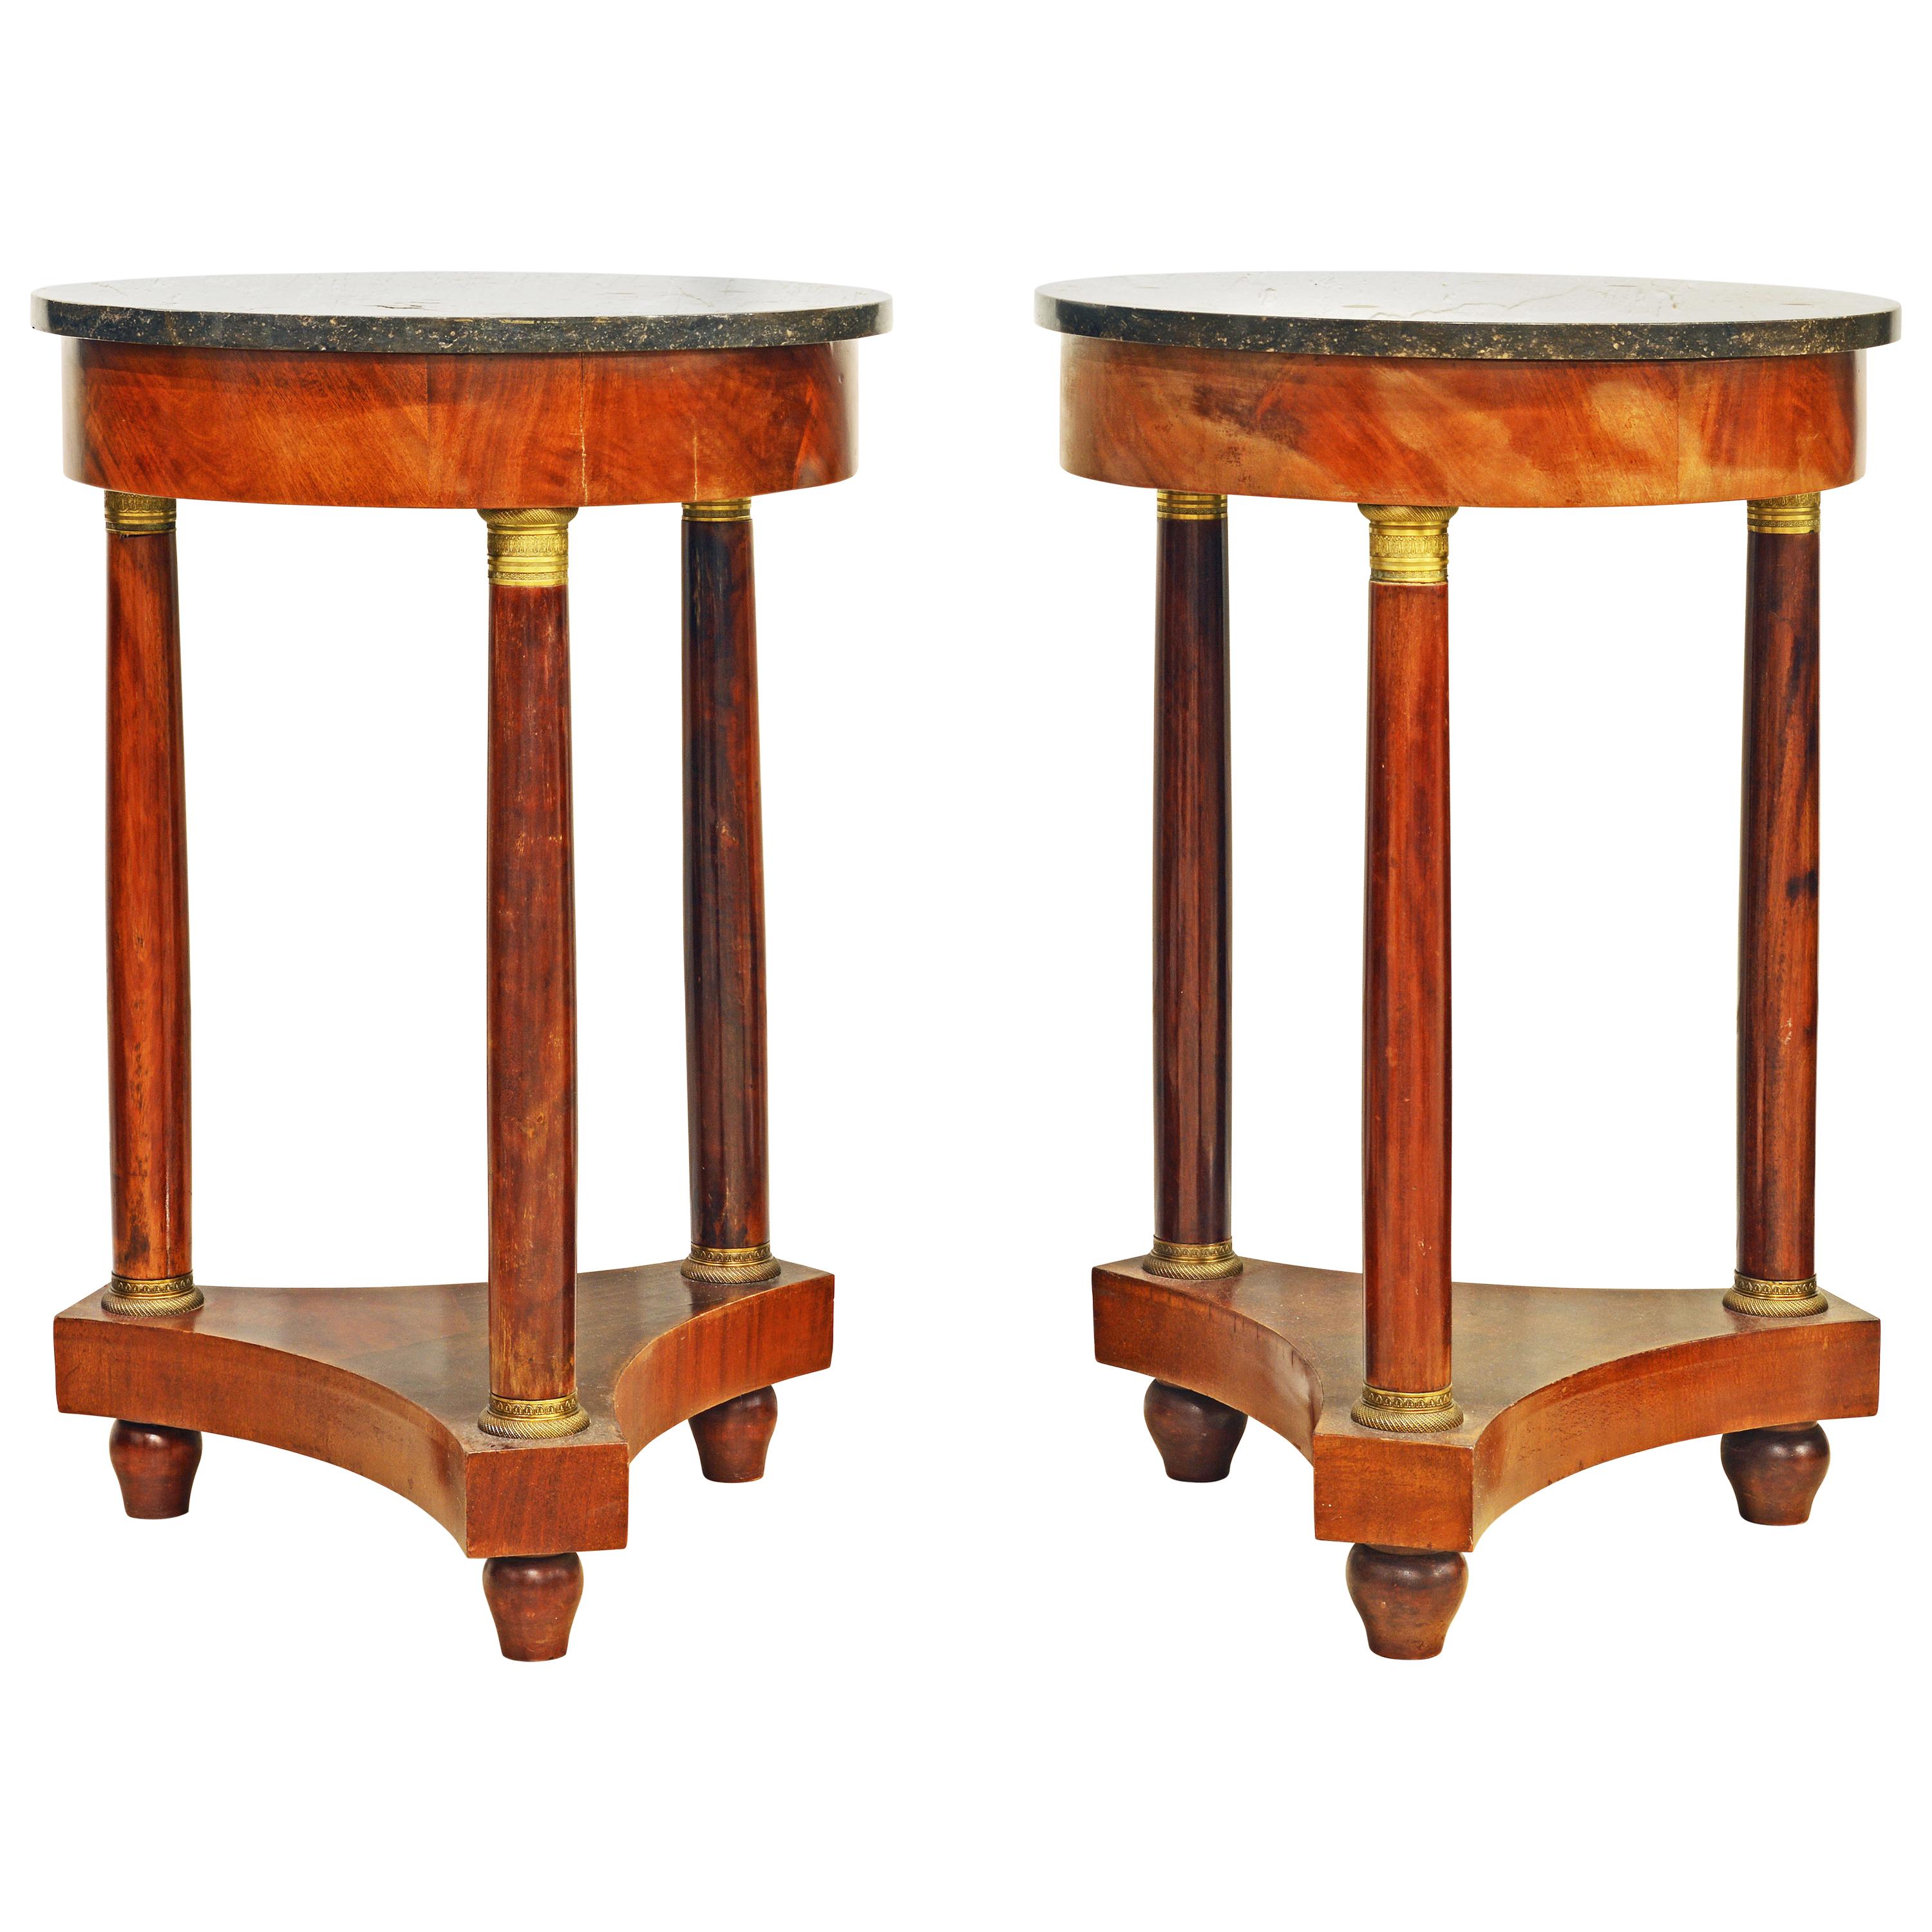 Pair of 19th Century Empire Style Gilt Bronze Mounted Marble-Top End Tables